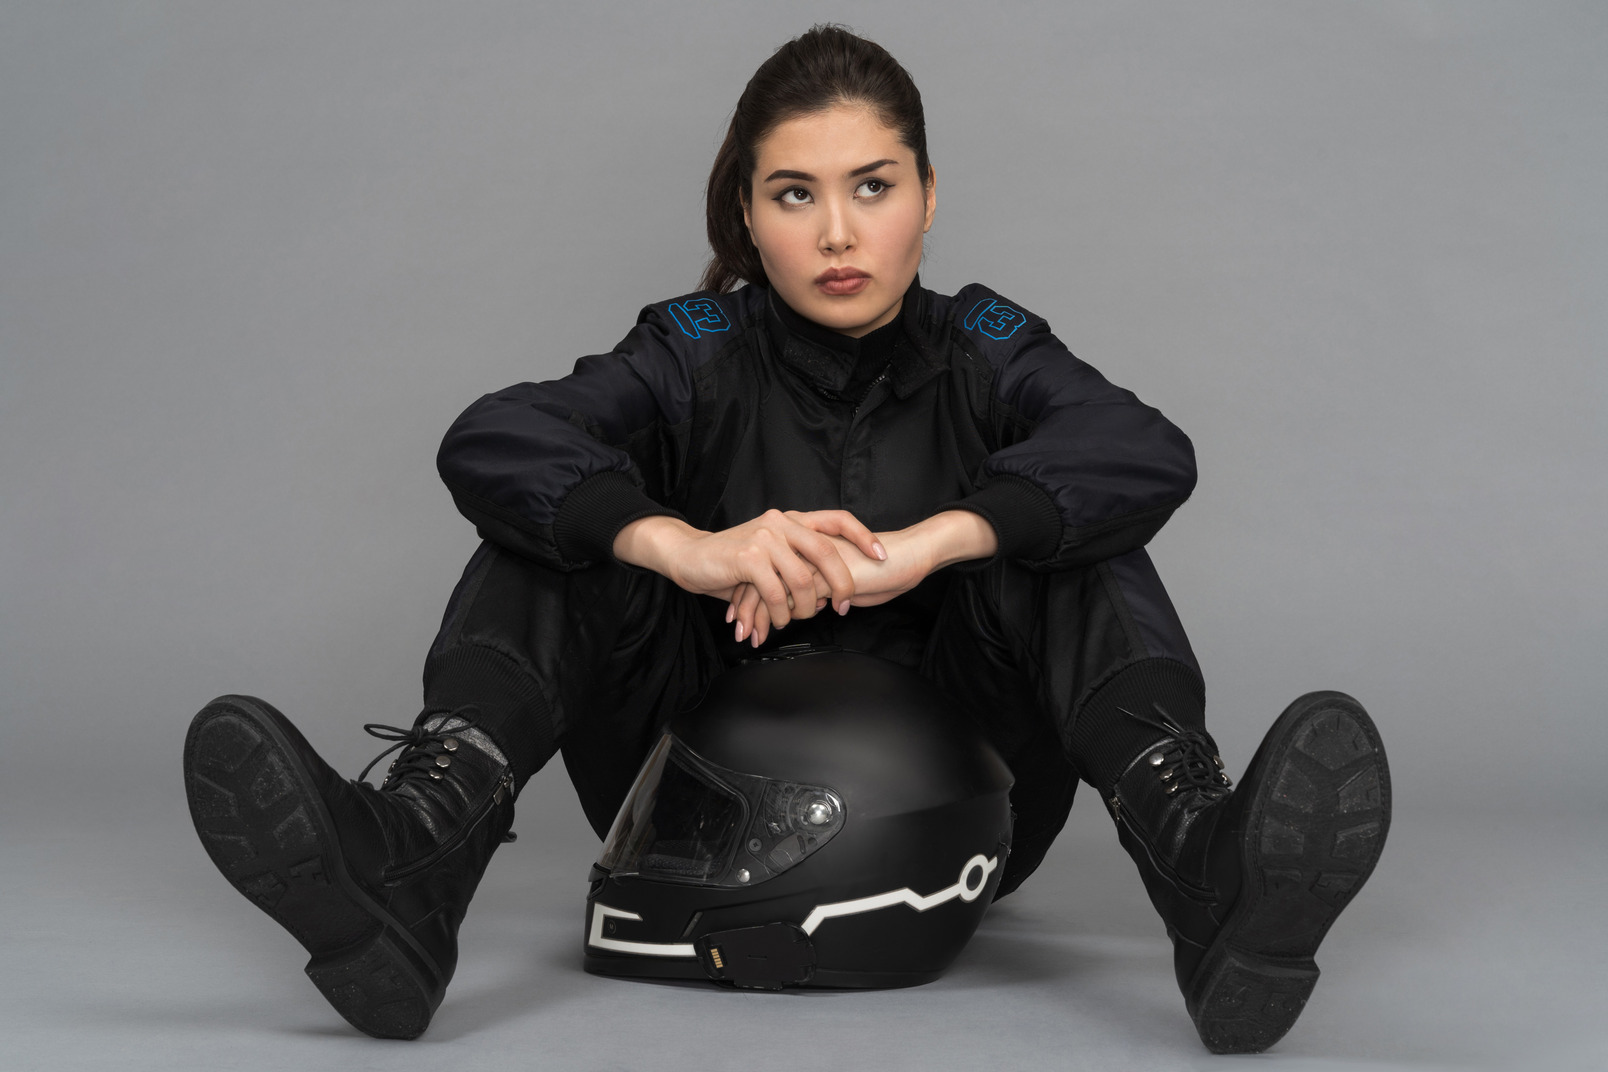 A self-confident young woman sitting with a helmet between her legs